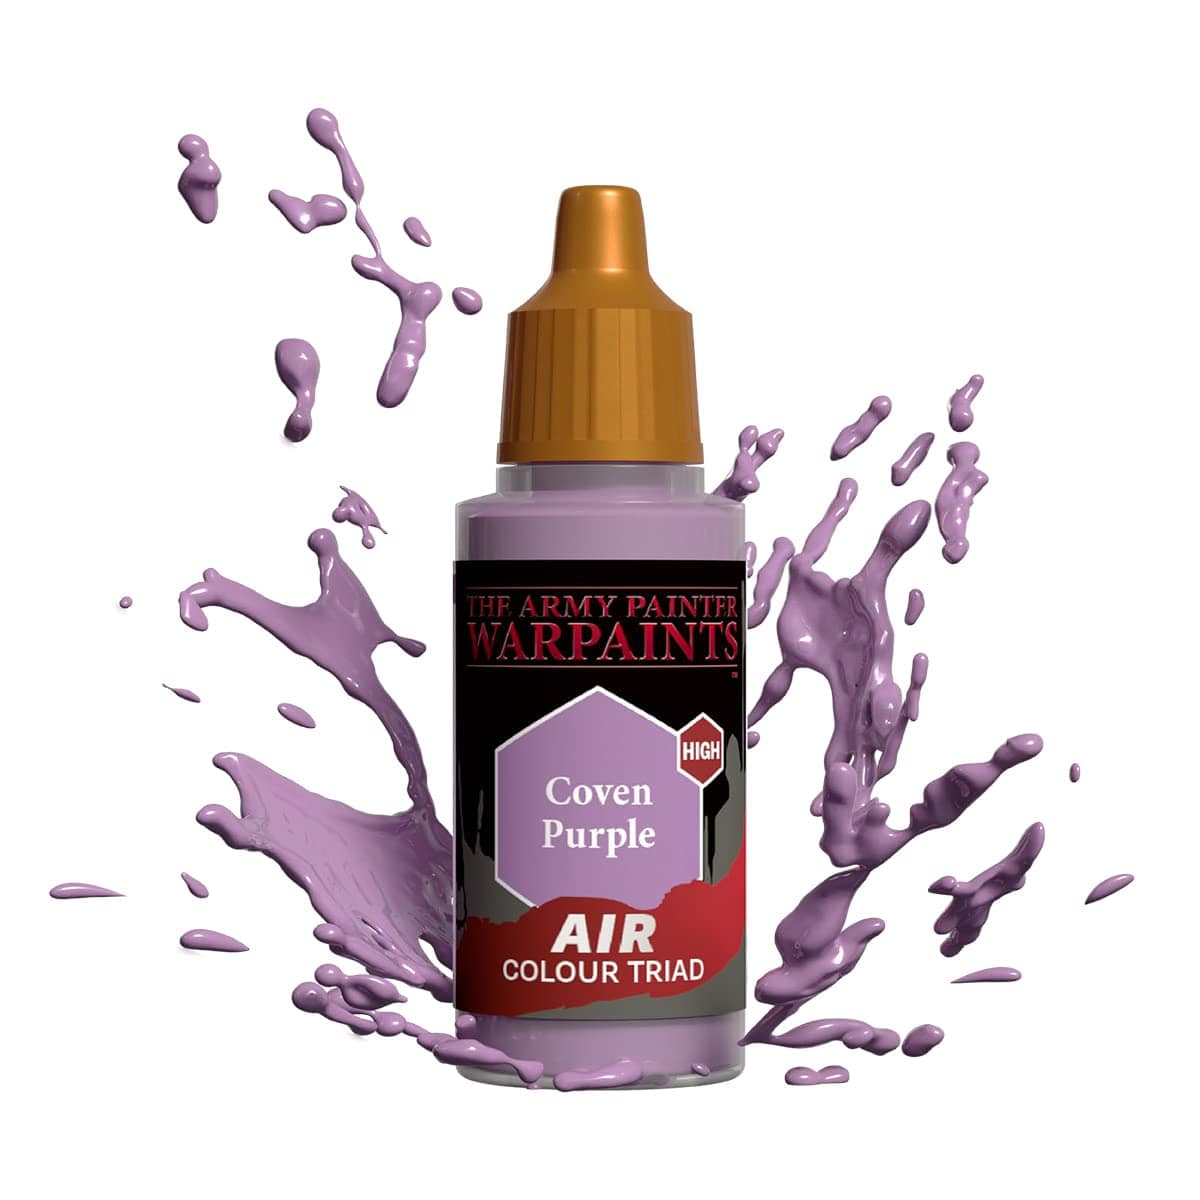 The Army Painter Accessories The Army Painter Warpaints Air: Coven Purple 18ml